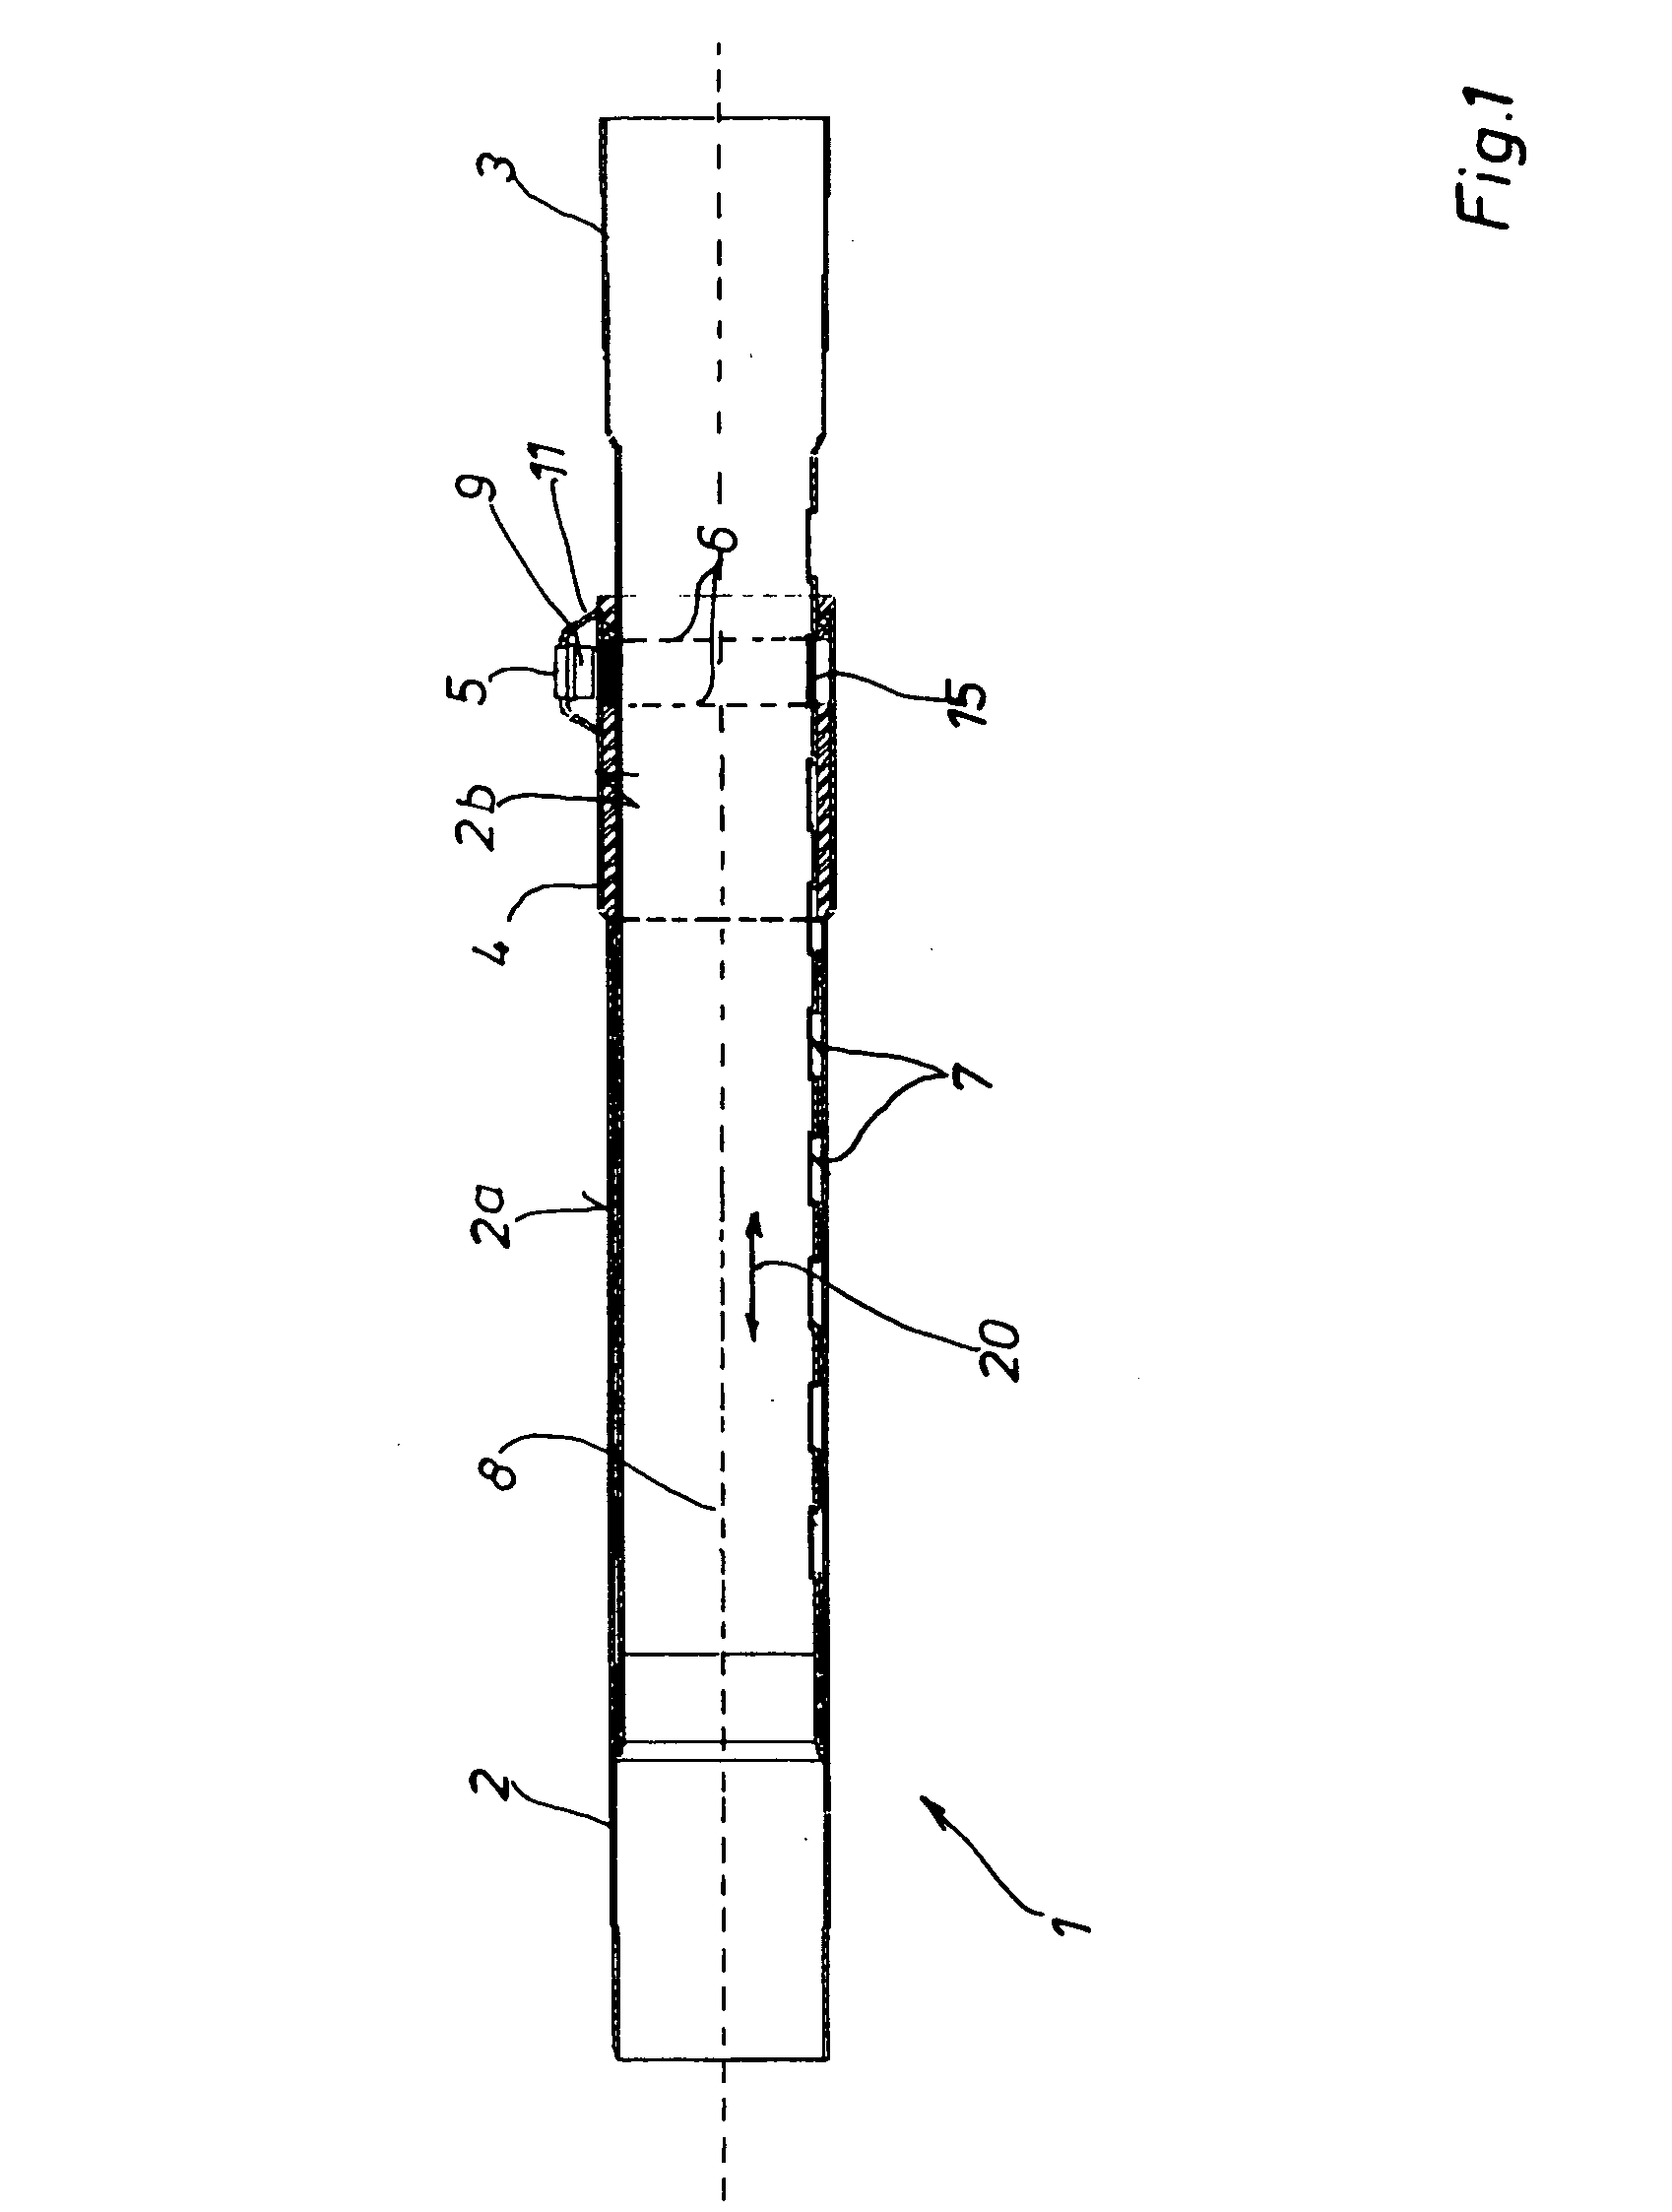 Telescopic vacuum cleaner suction tube with an interlocking element in the form of a bow spring